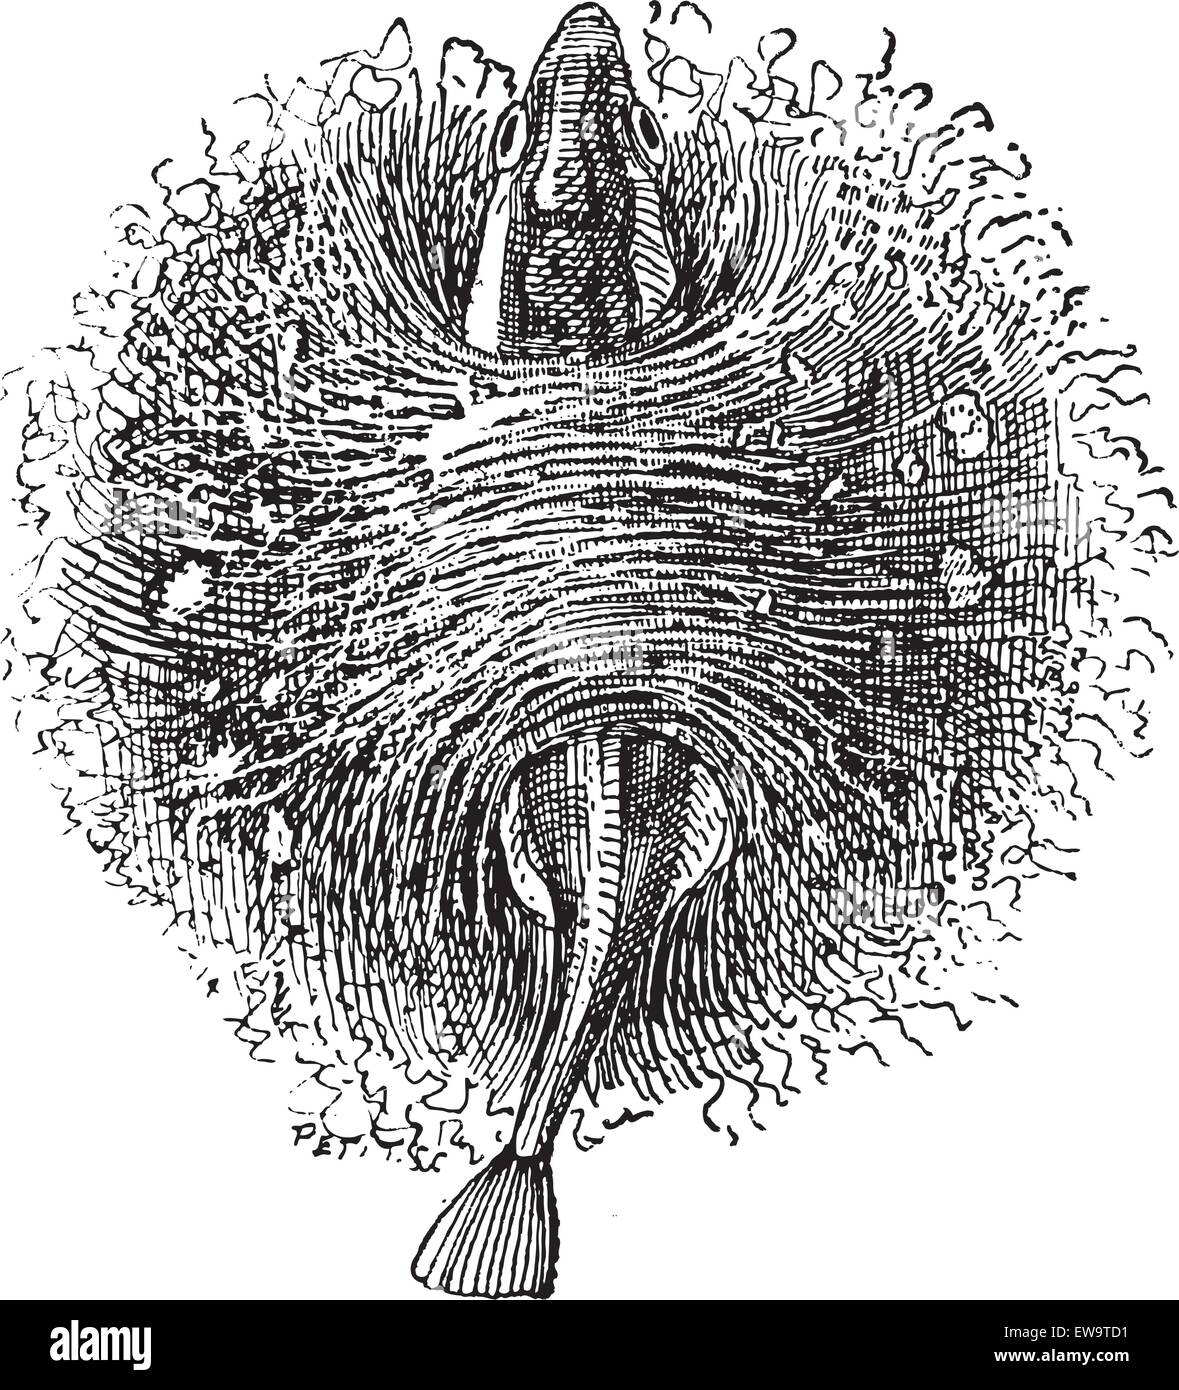 Nest of the Stickleback or Gasterosteus sp., made of vegetation held together by secretions from their kidneys, vintage engraved illustration. Dictionary of Words and Things - Larive and Fleury - 1895 Stock Vector